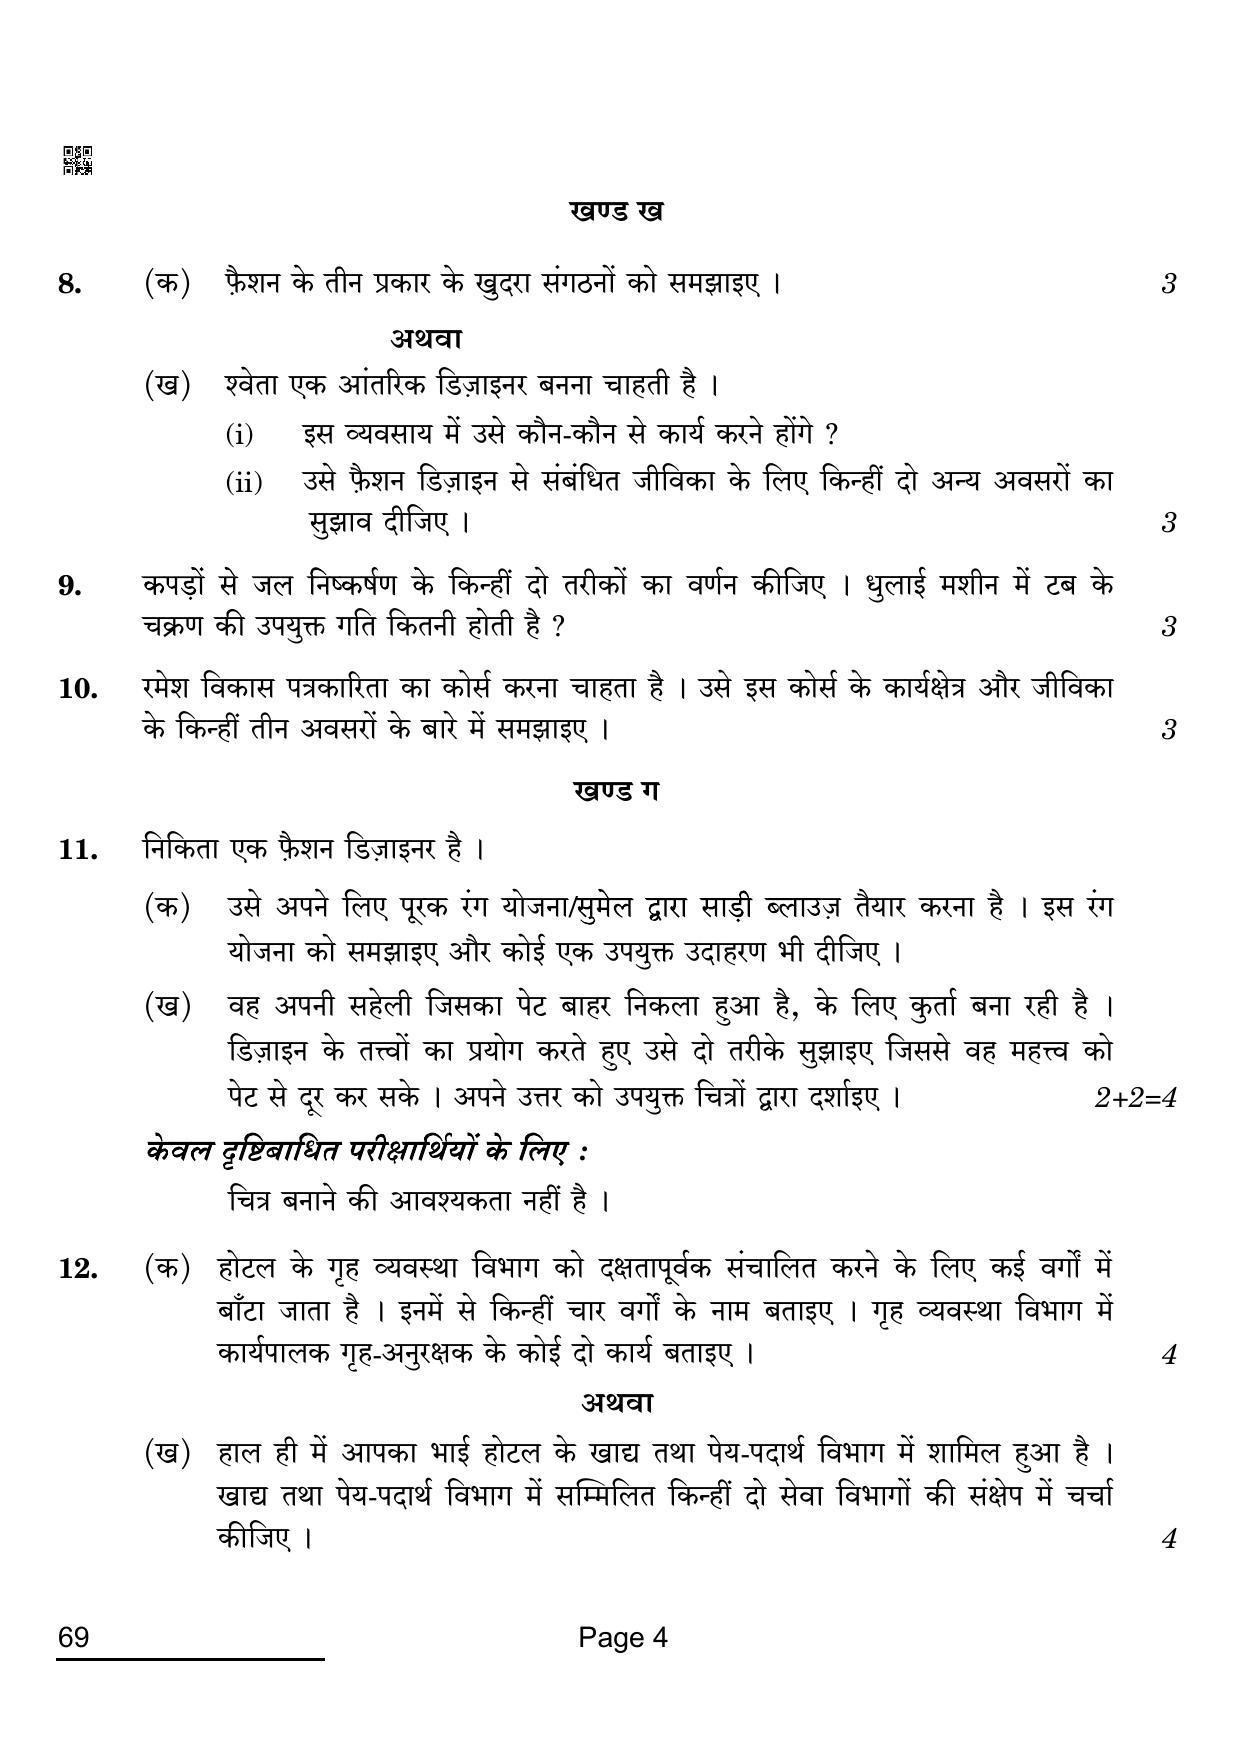 CBSE Class 12 69_Home Science 2022 Question Paper - Page 4